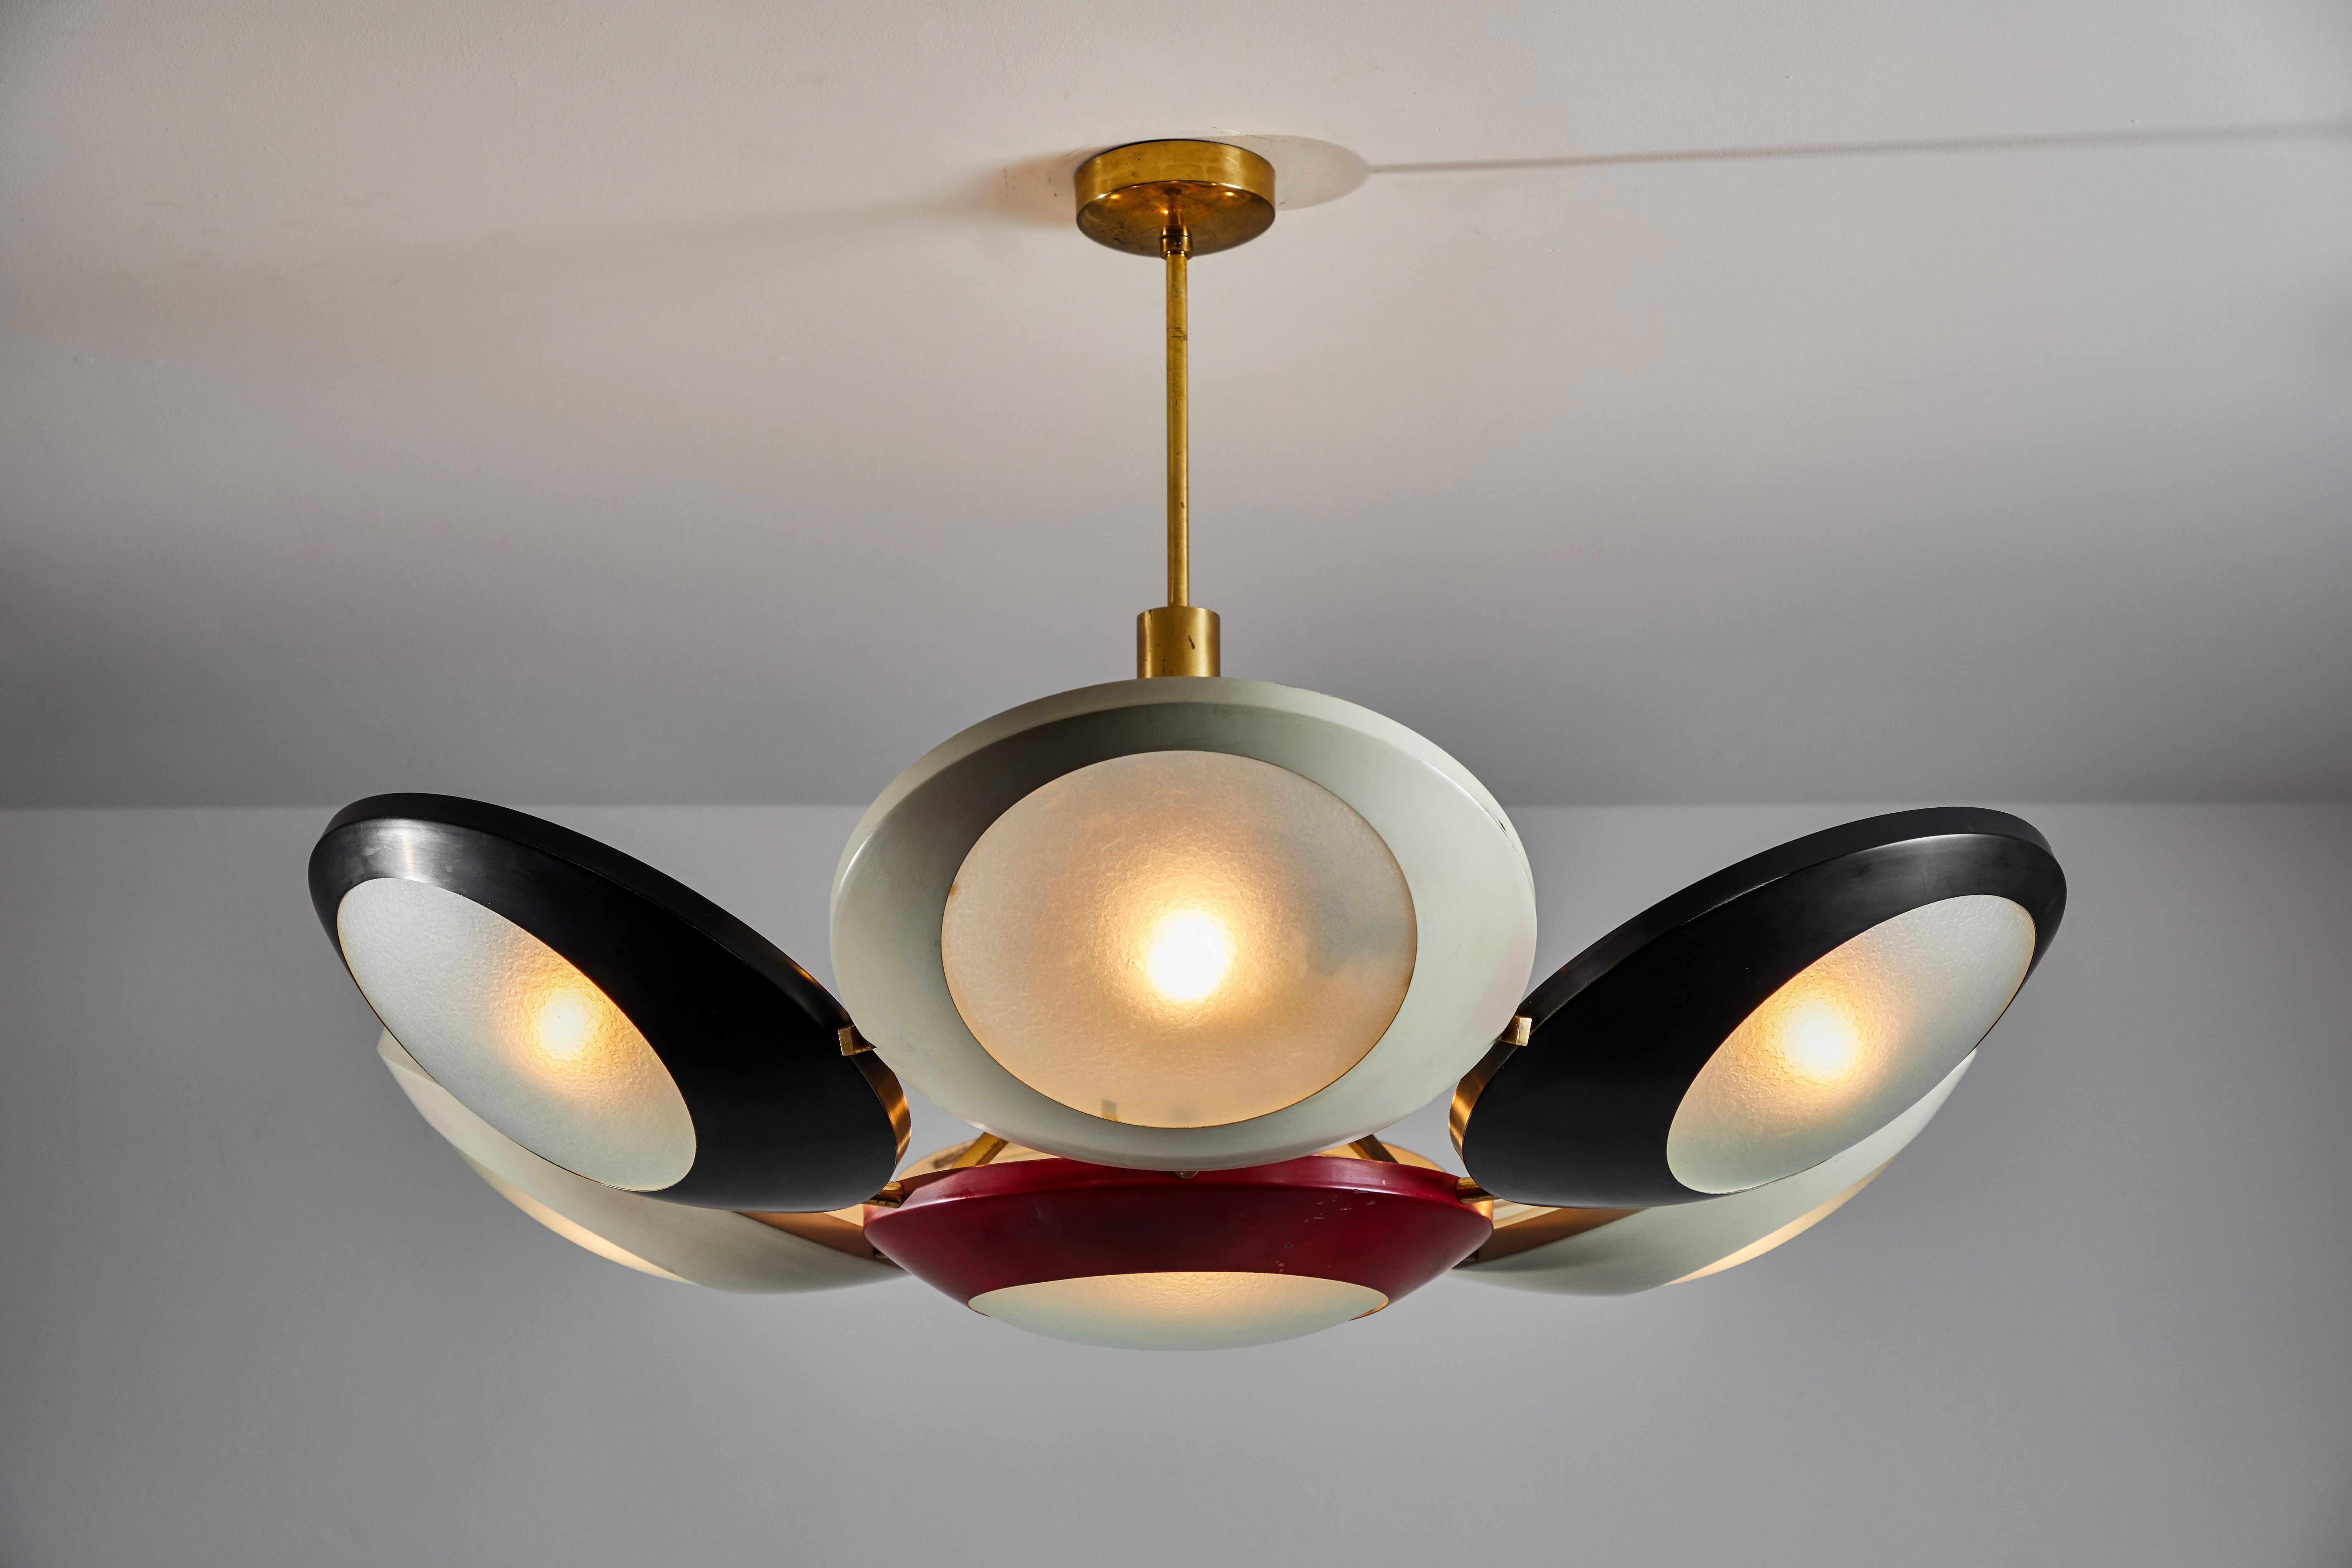 Seven shade chandelier by Stilnovo. Manufactured in Italy, circa 1950s. Brass, textured glass and original enameled metal. Rewired for U.S. junction boxes. Maintains original manufacturers label. Takes seven E27 60w maximum bulbs. Bulbs provided as